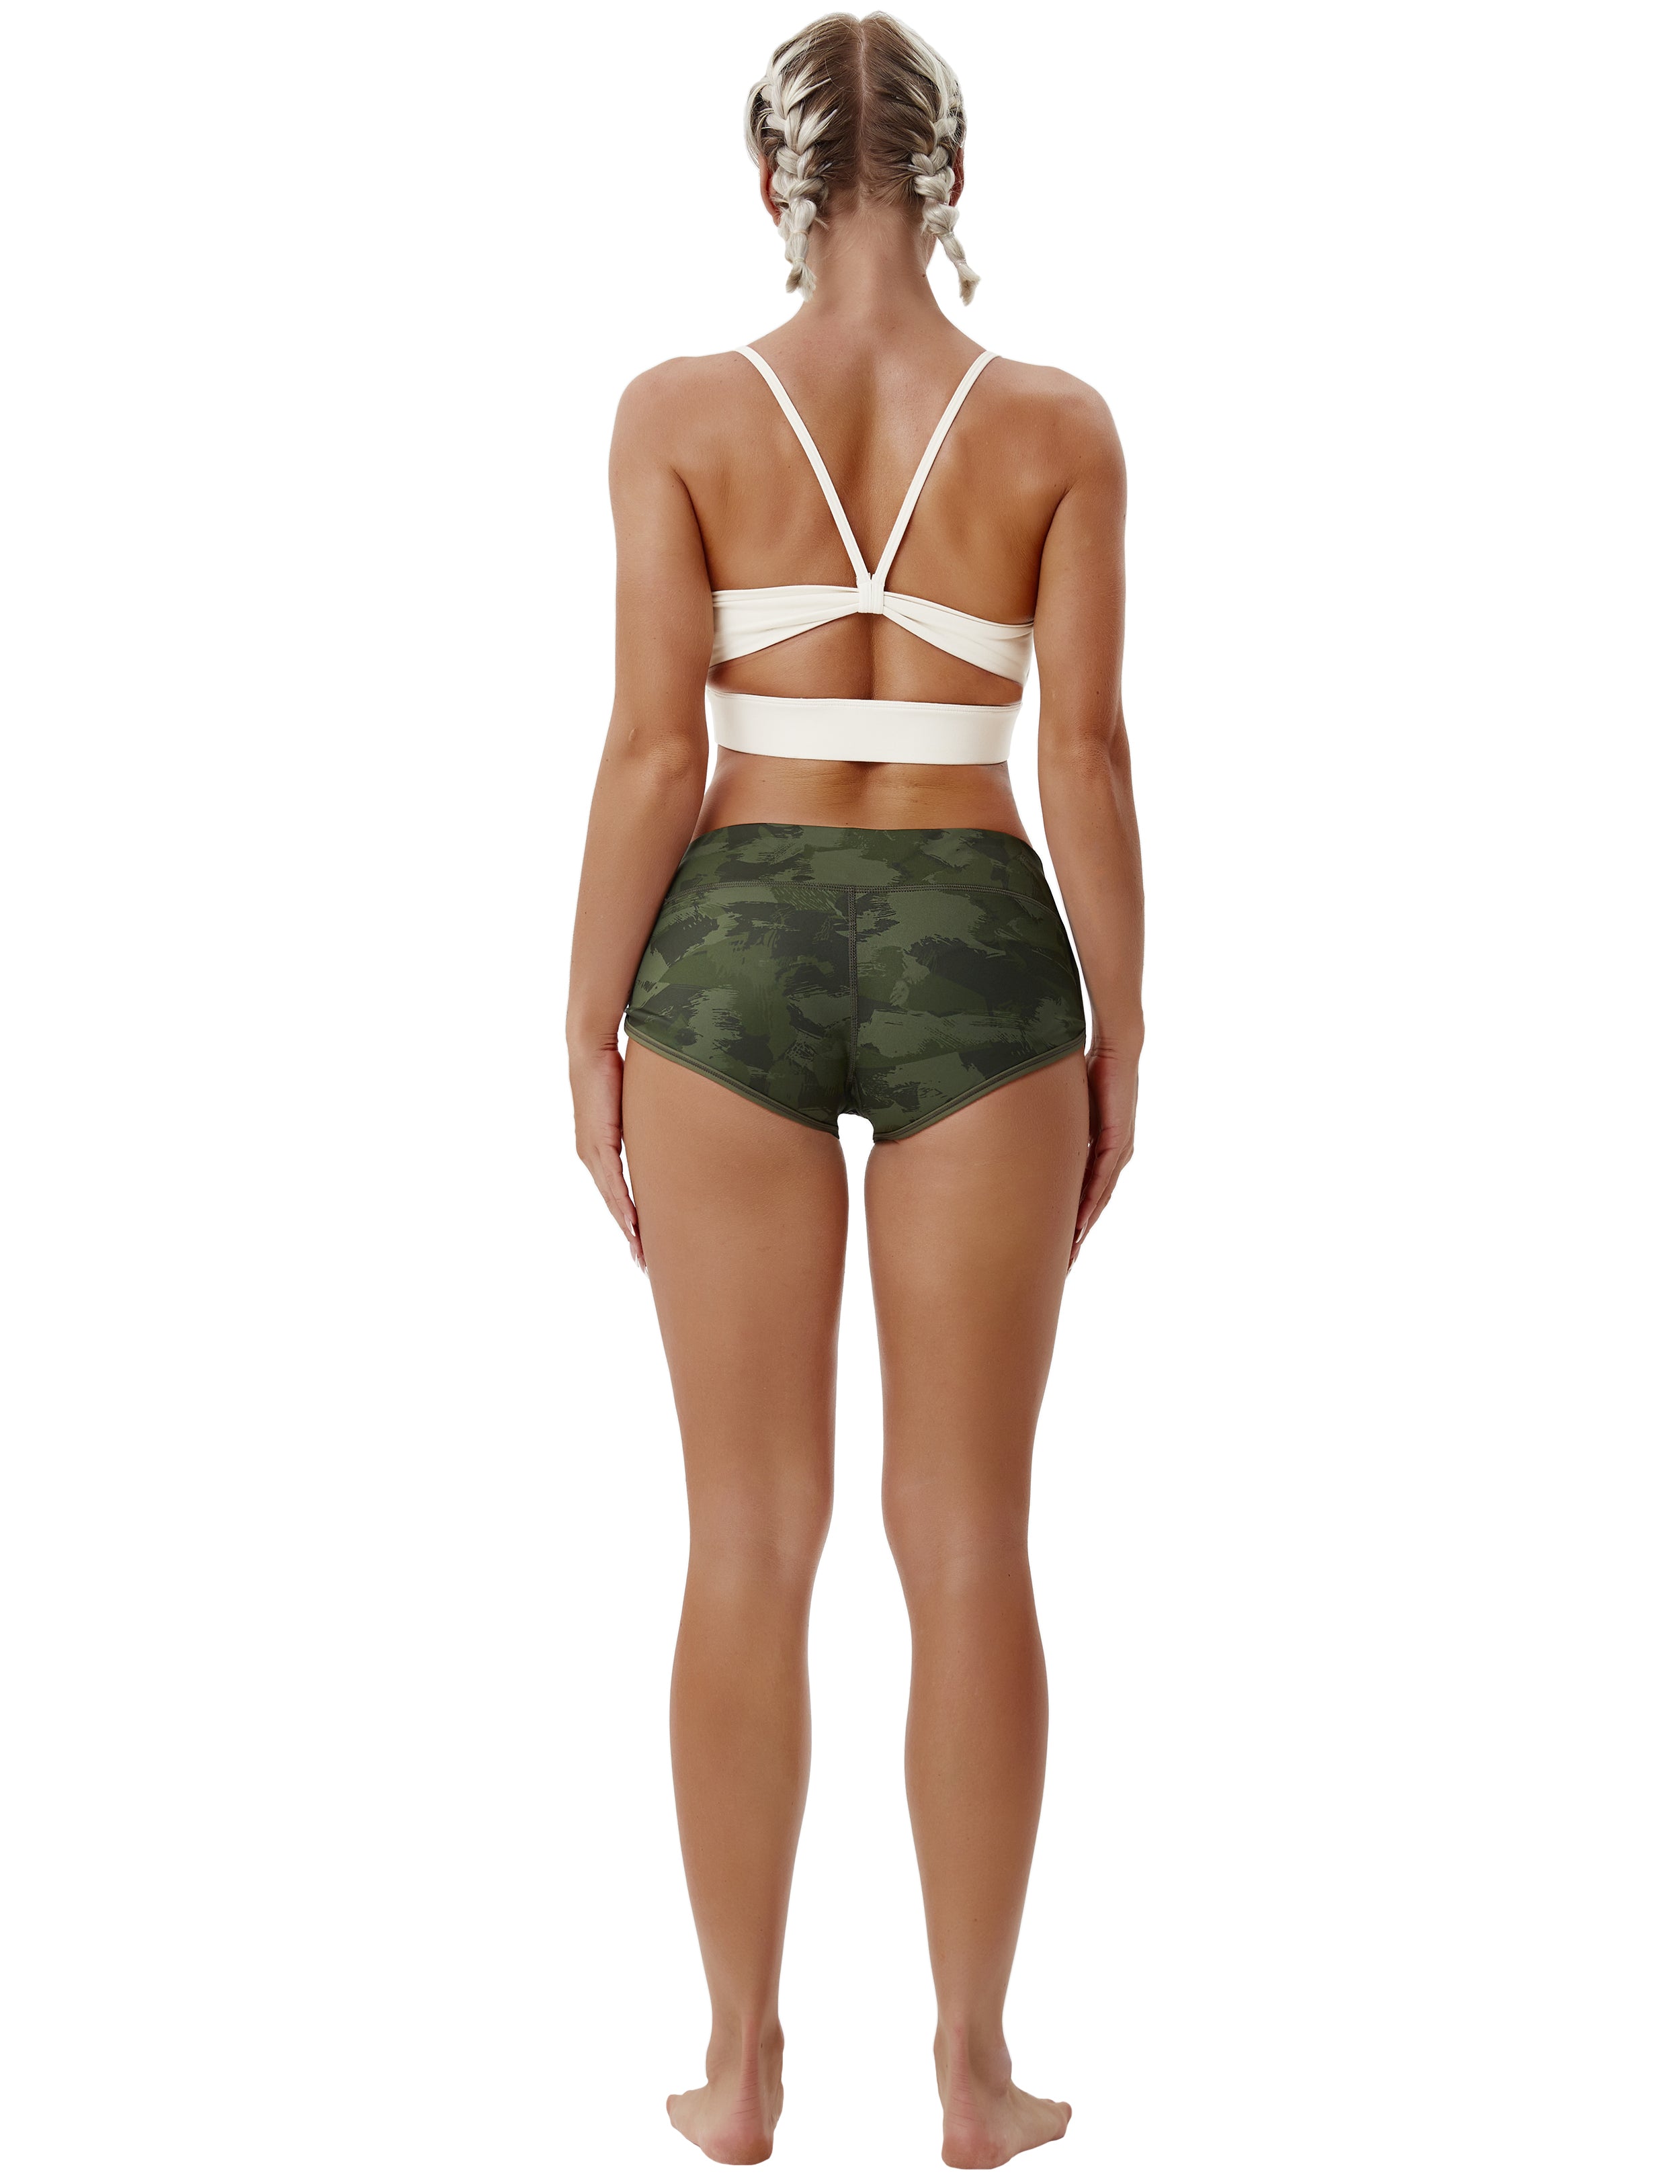 Printed Booty Tall Size Shorts green brushcamo Sleek, soft, smooth and totally comfortable: our newest sexy style is here. Softest-ever fabric High elasticity High density 4-way stretch Fabric doesn't attract lint easily No see-through Moisture-wicking Machine wash 78% Polyester, 22% Spandex